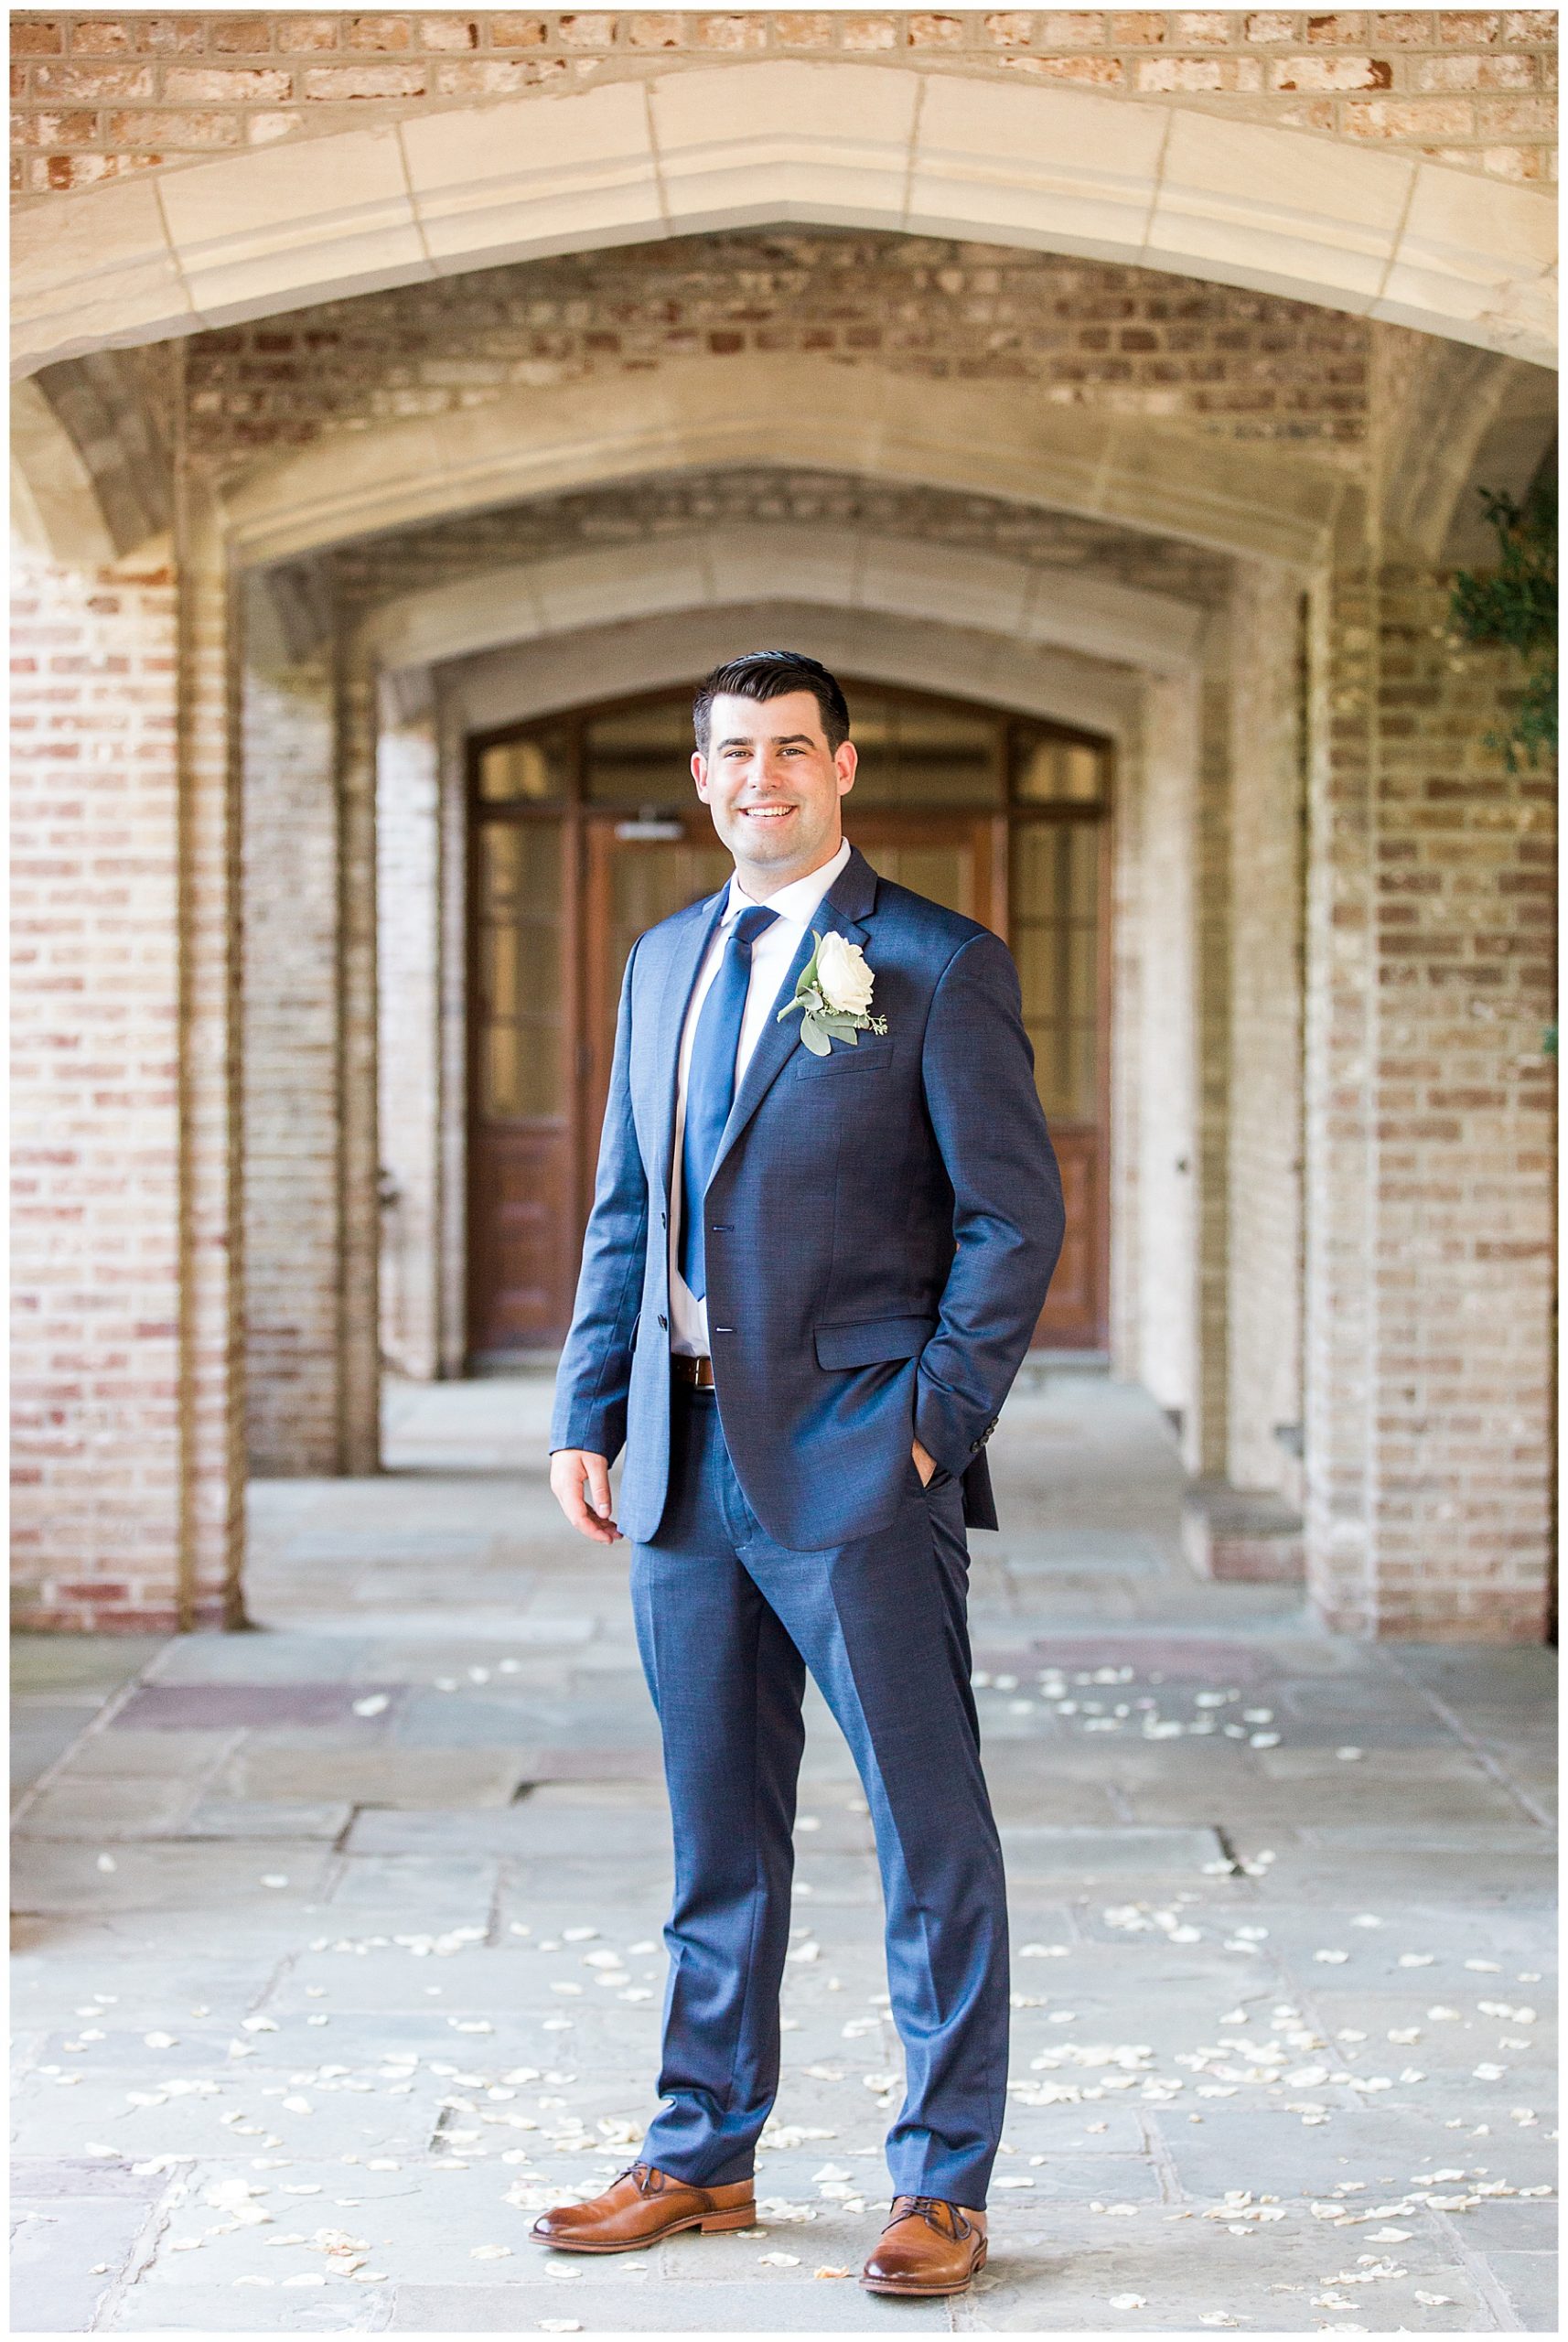 Connecticut Groom St Lukes Episcopal Church Groom Portrait in Archway